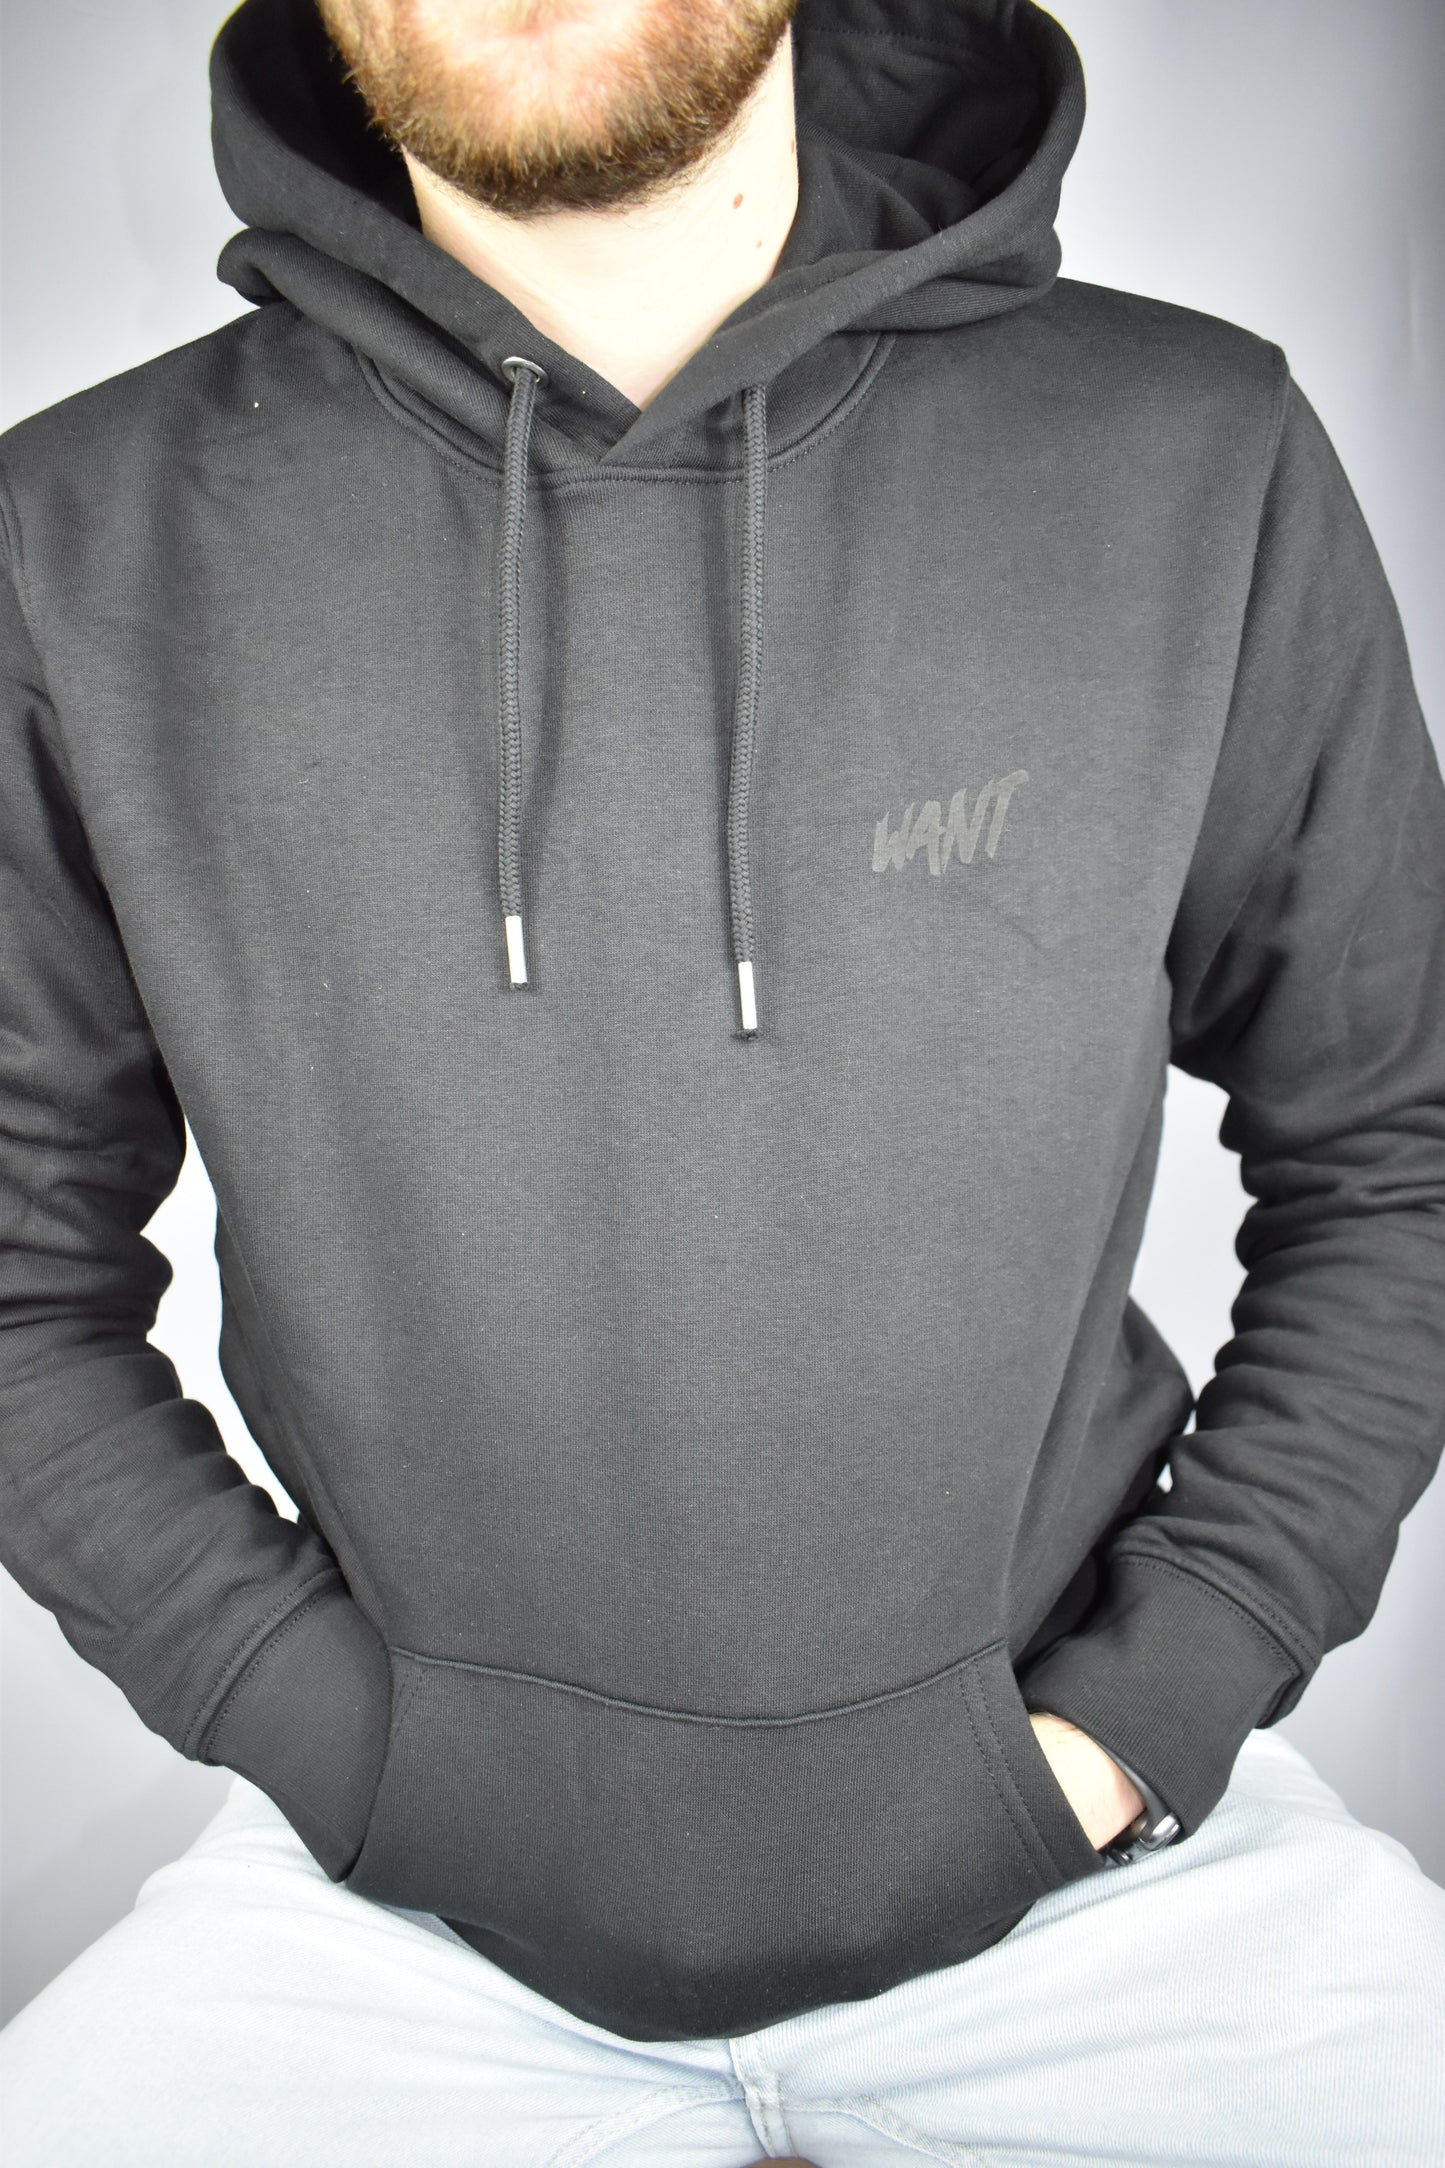 All Black Organic WANT Hoodie - Limited Edition